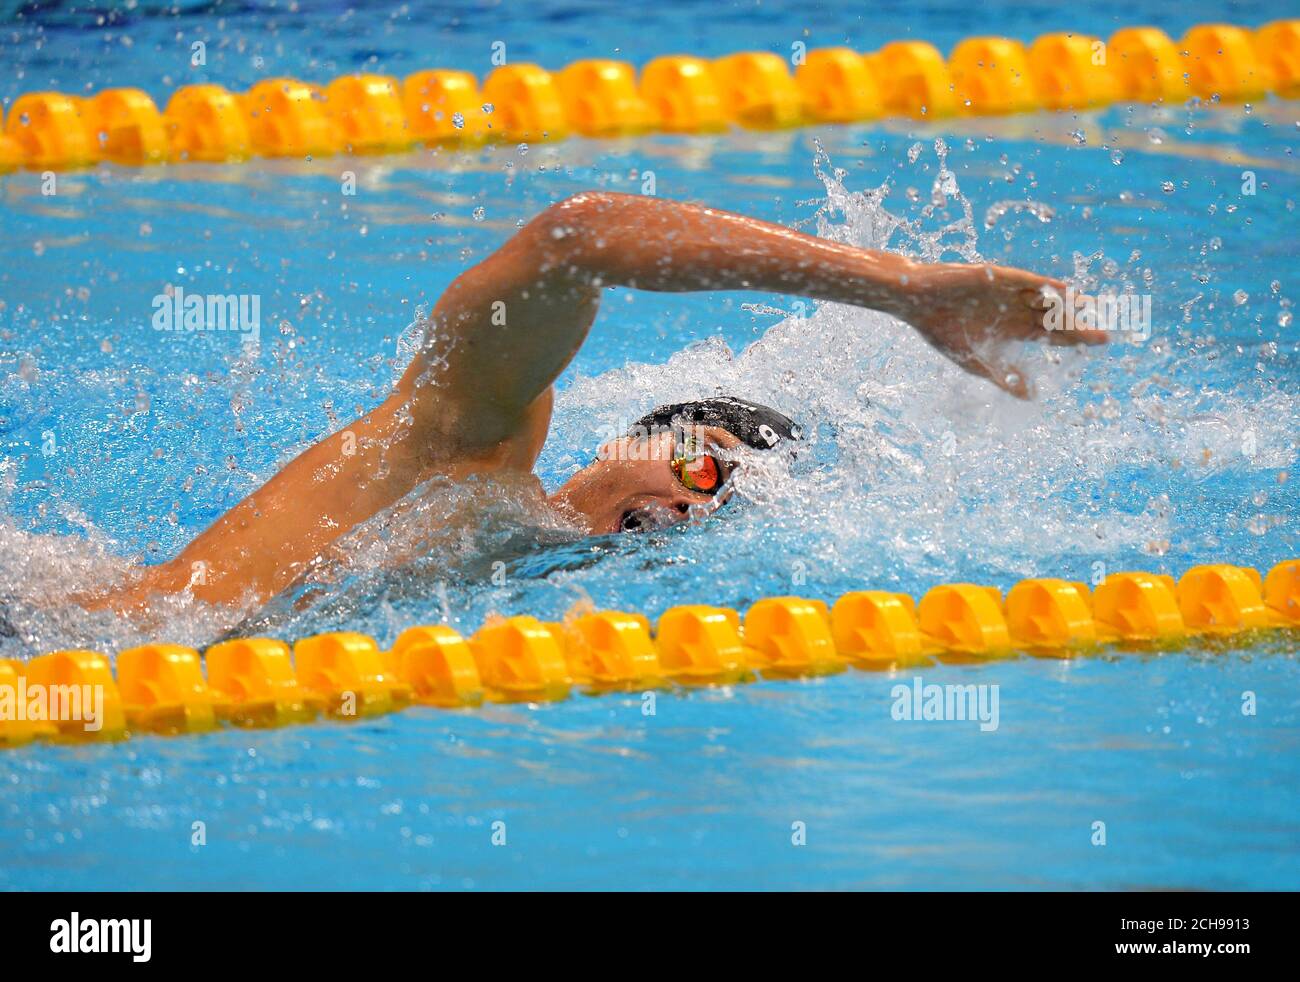 Italy's Gregorio Paltrinieri competes in the Men's 1500m Freestyle Final during day ten of the European Aquatics Championships at the London Aquatics Centre, Stratford. Stock Photo